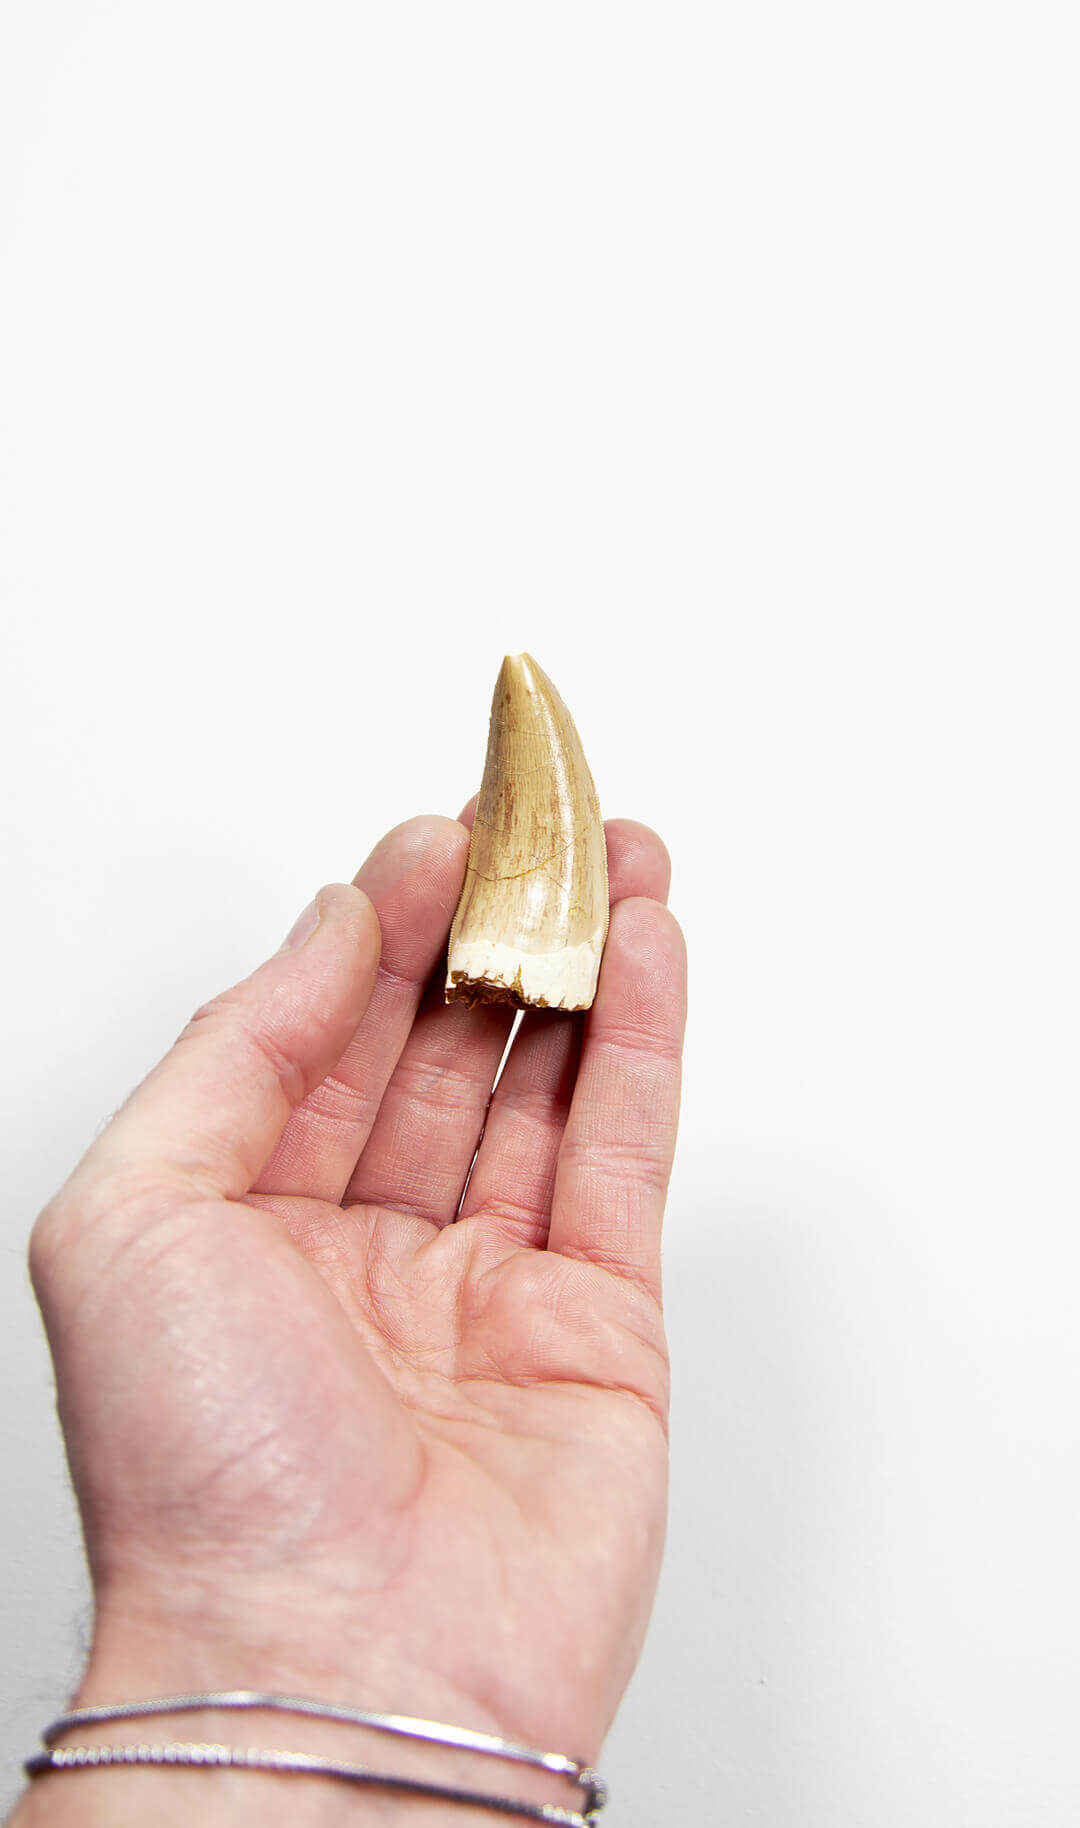 real fossil dinosaur carcharodontosaurus tooth for sale at the uk fossil store 18